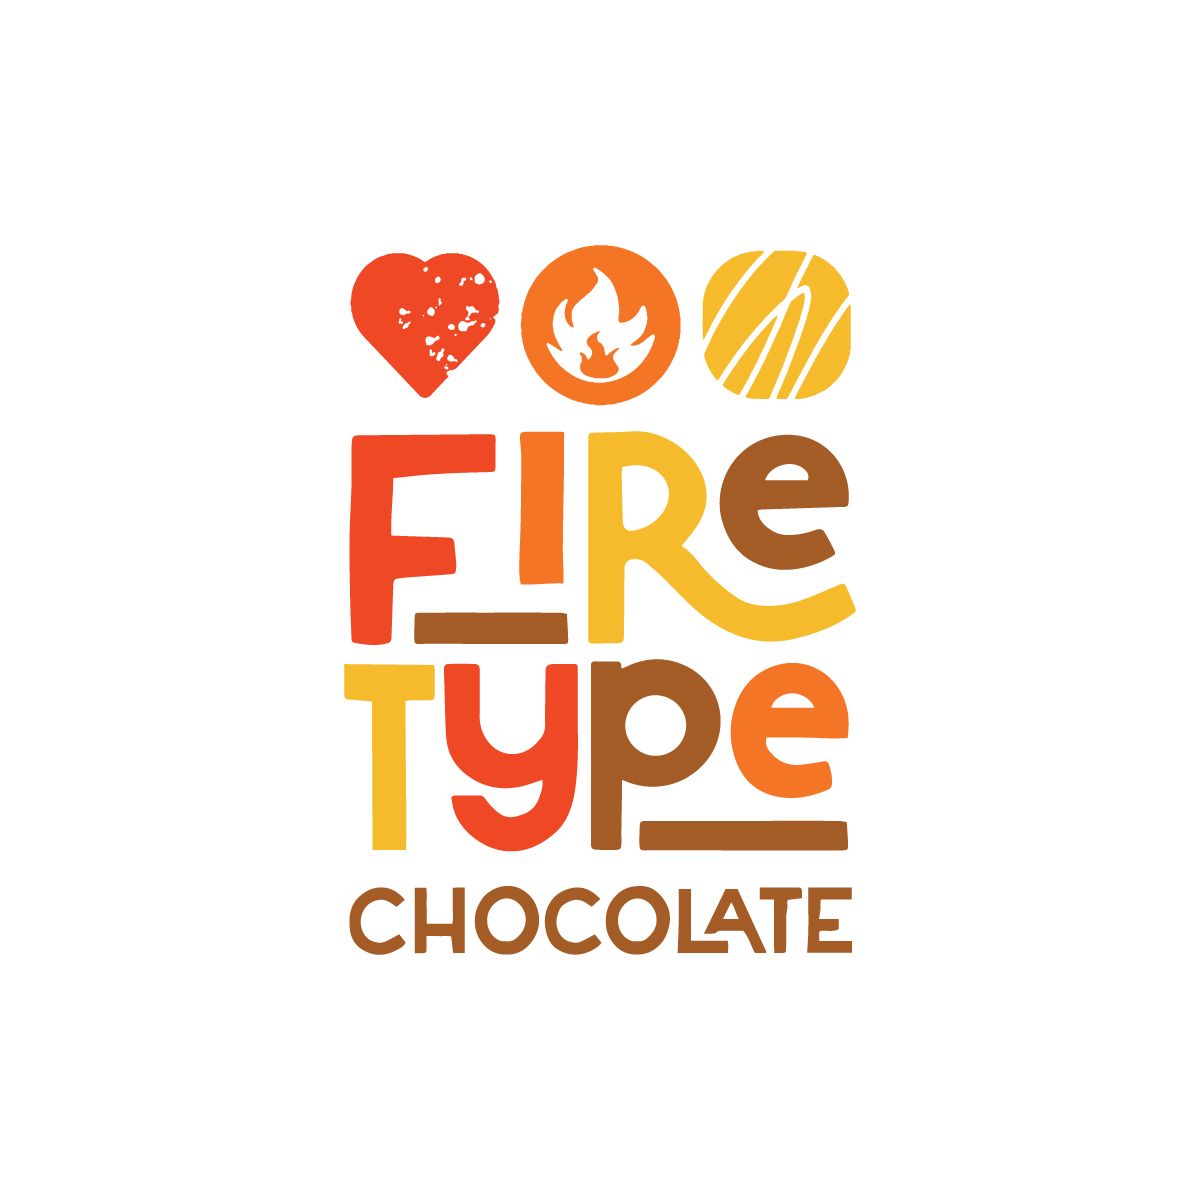 Firetype Chocolate in Thornes Marketplace Northampton MA creates beautiful and unique chocolate treats, with flavors that will light your fire!